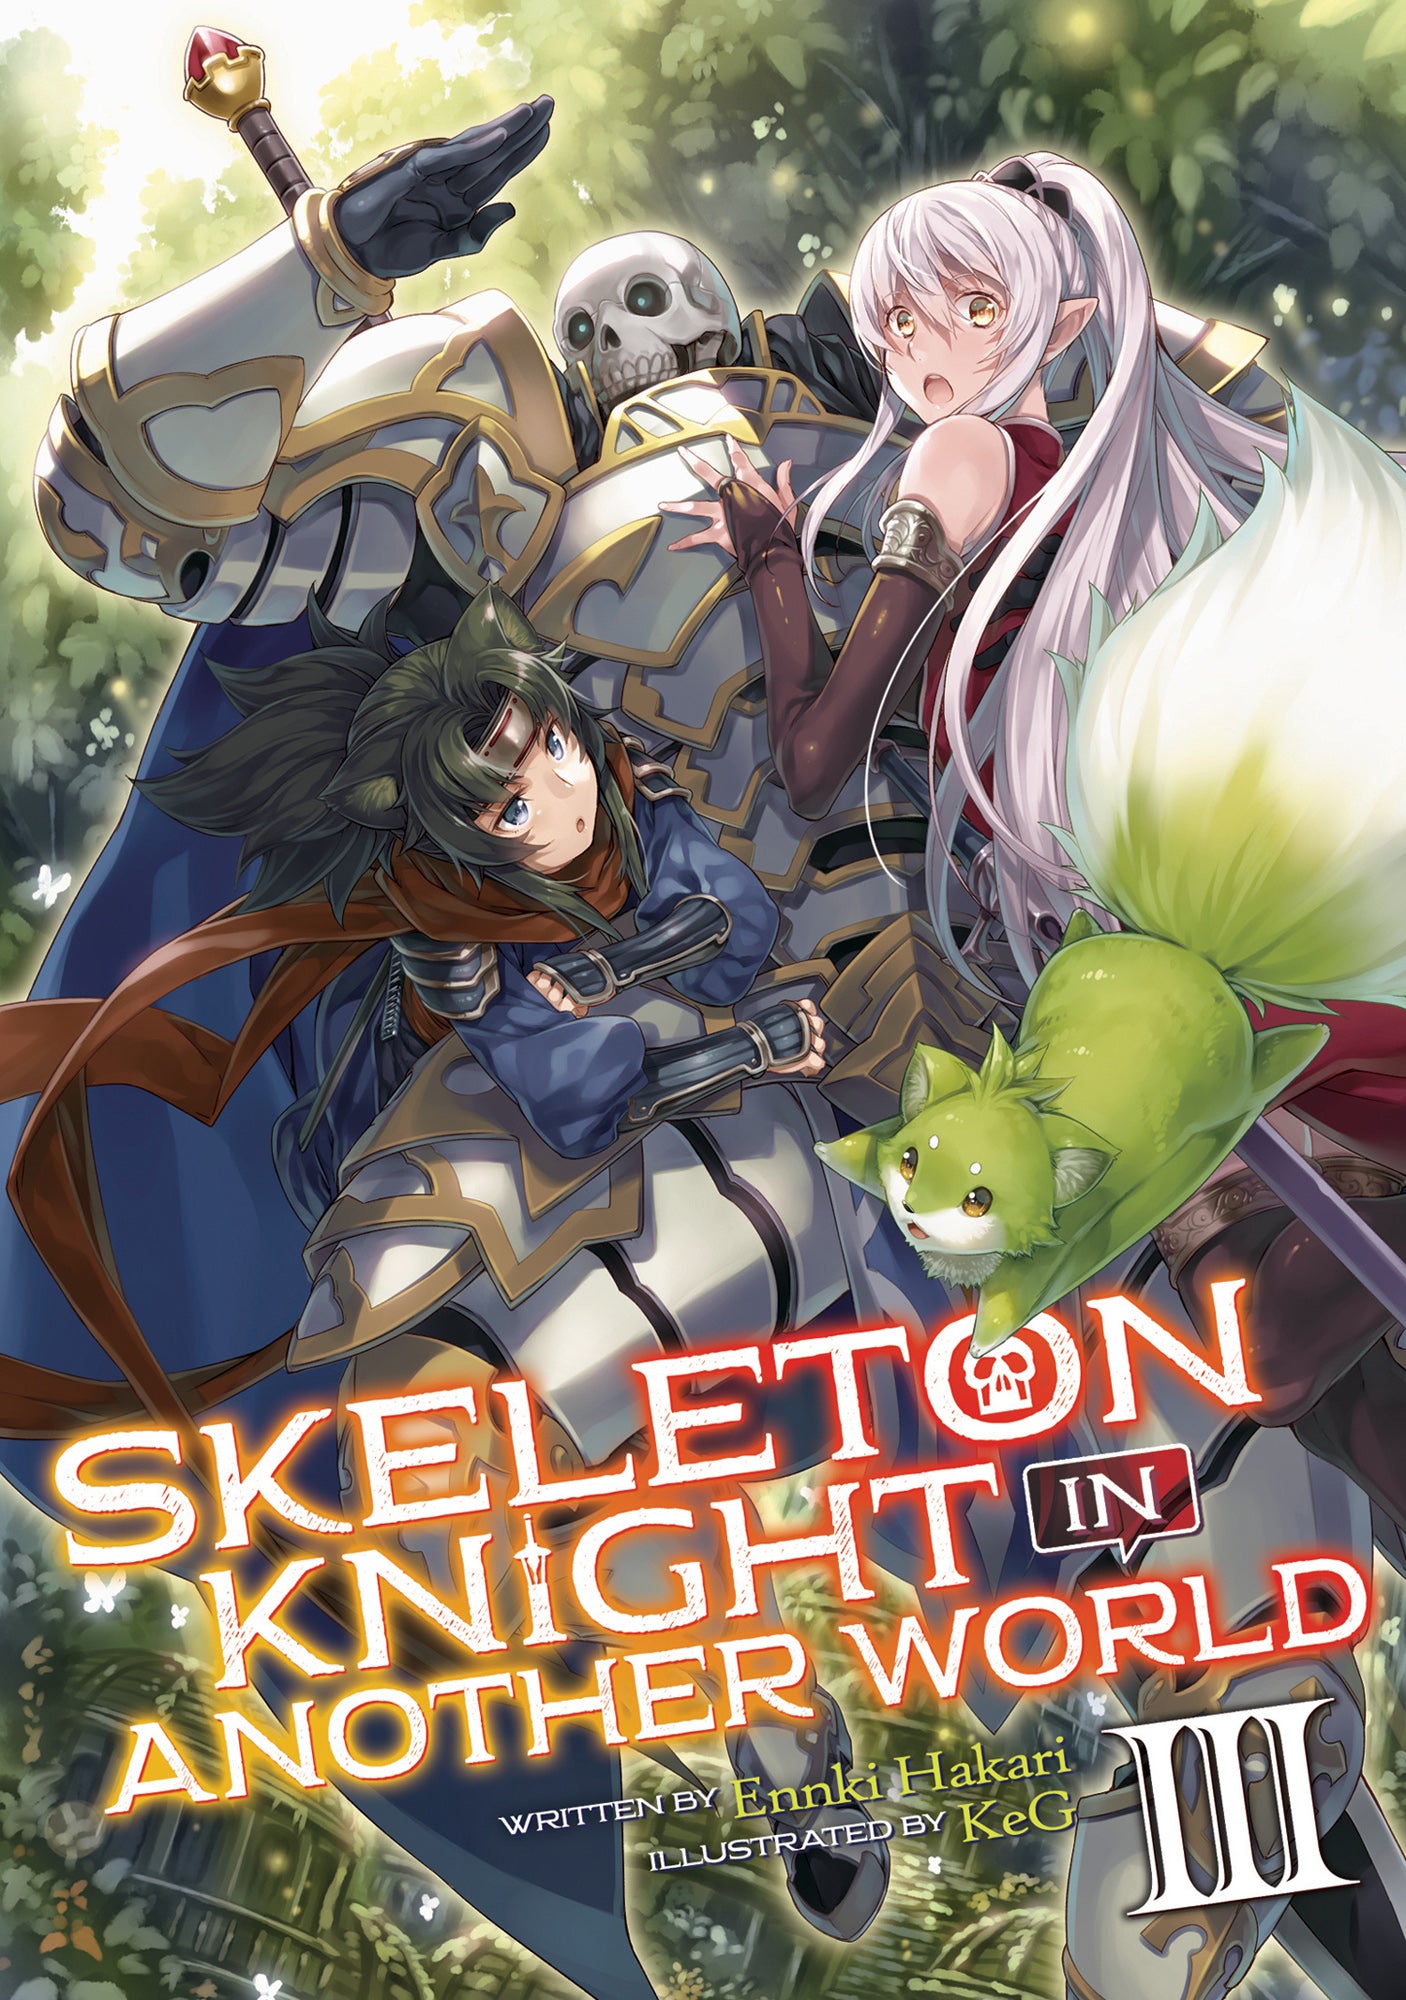 Skeleton Knight in Another World (Light Novel) Vol. 03 (Out of Stock Indefinitely)